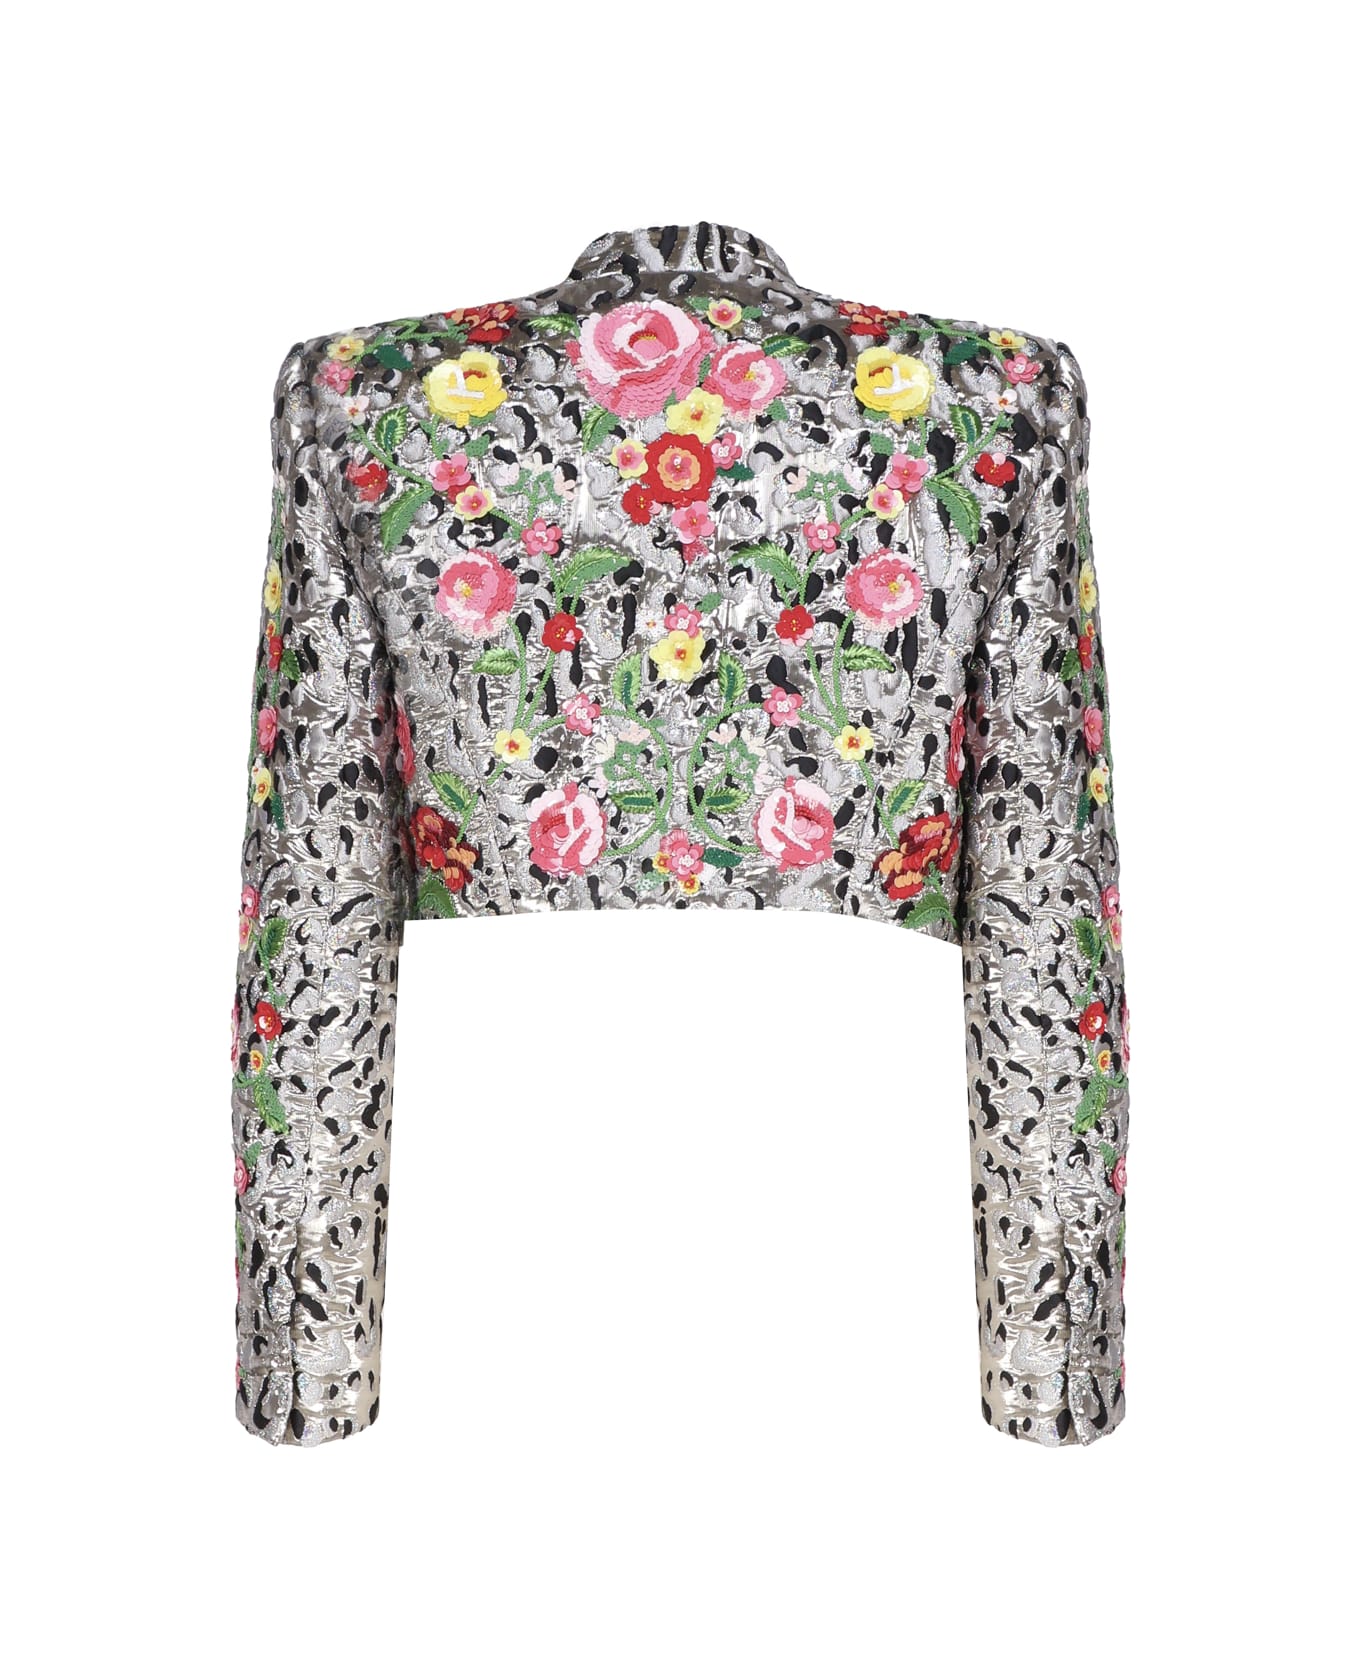 Dolce & Gabbana Jacket With Animal Print And Flowers - Multicolor ジャケット